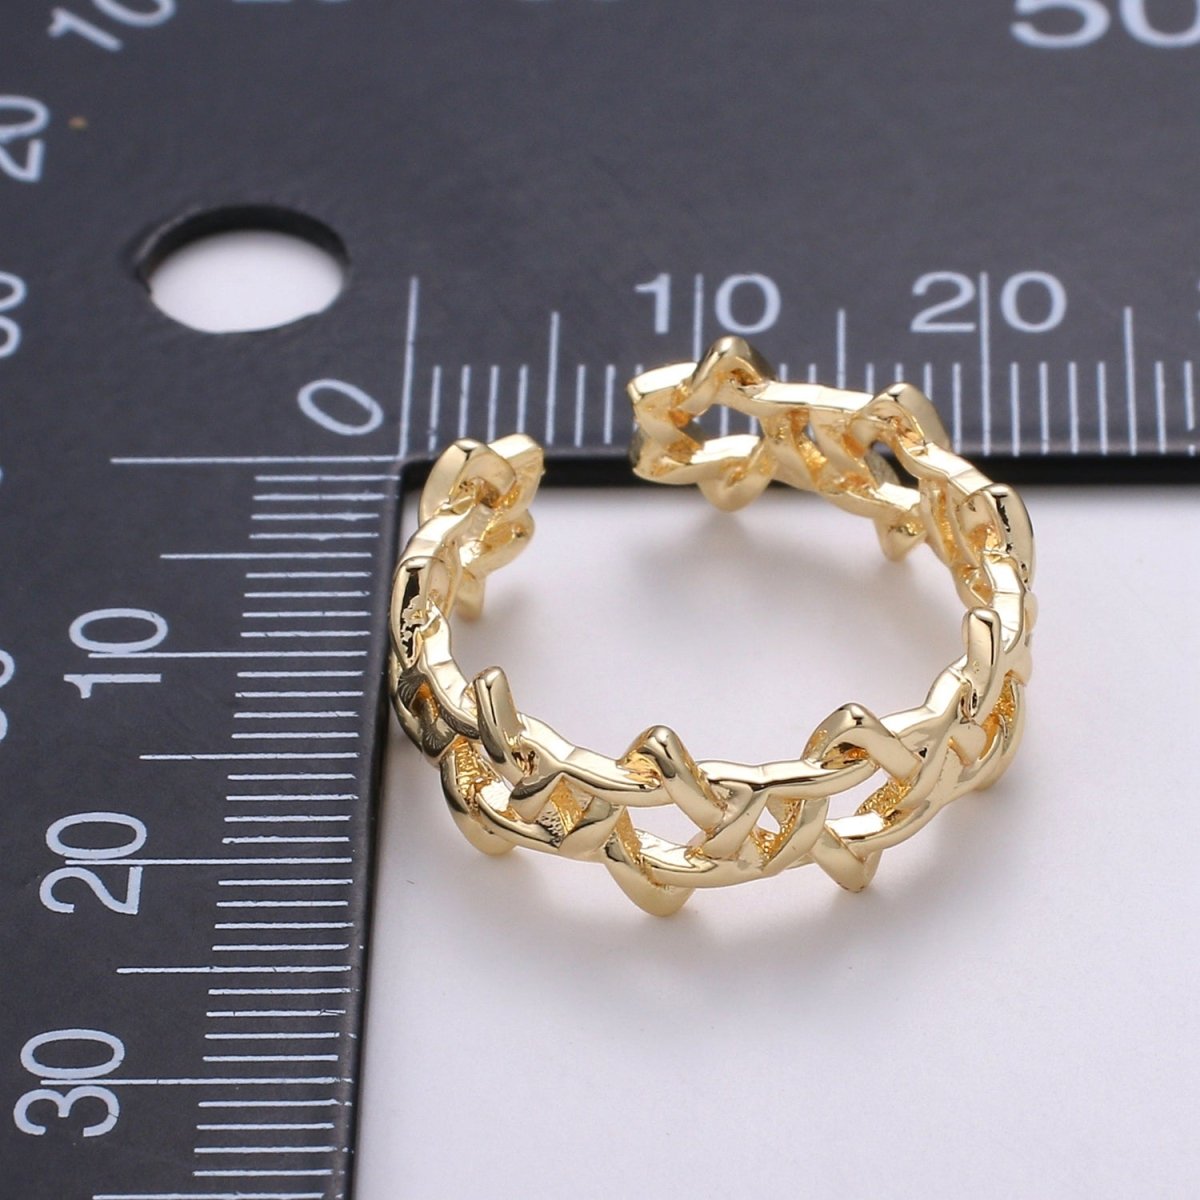 OS DEL-18K Gold Filled Star Chain Adjustable Ring - R274 - DLUXCA